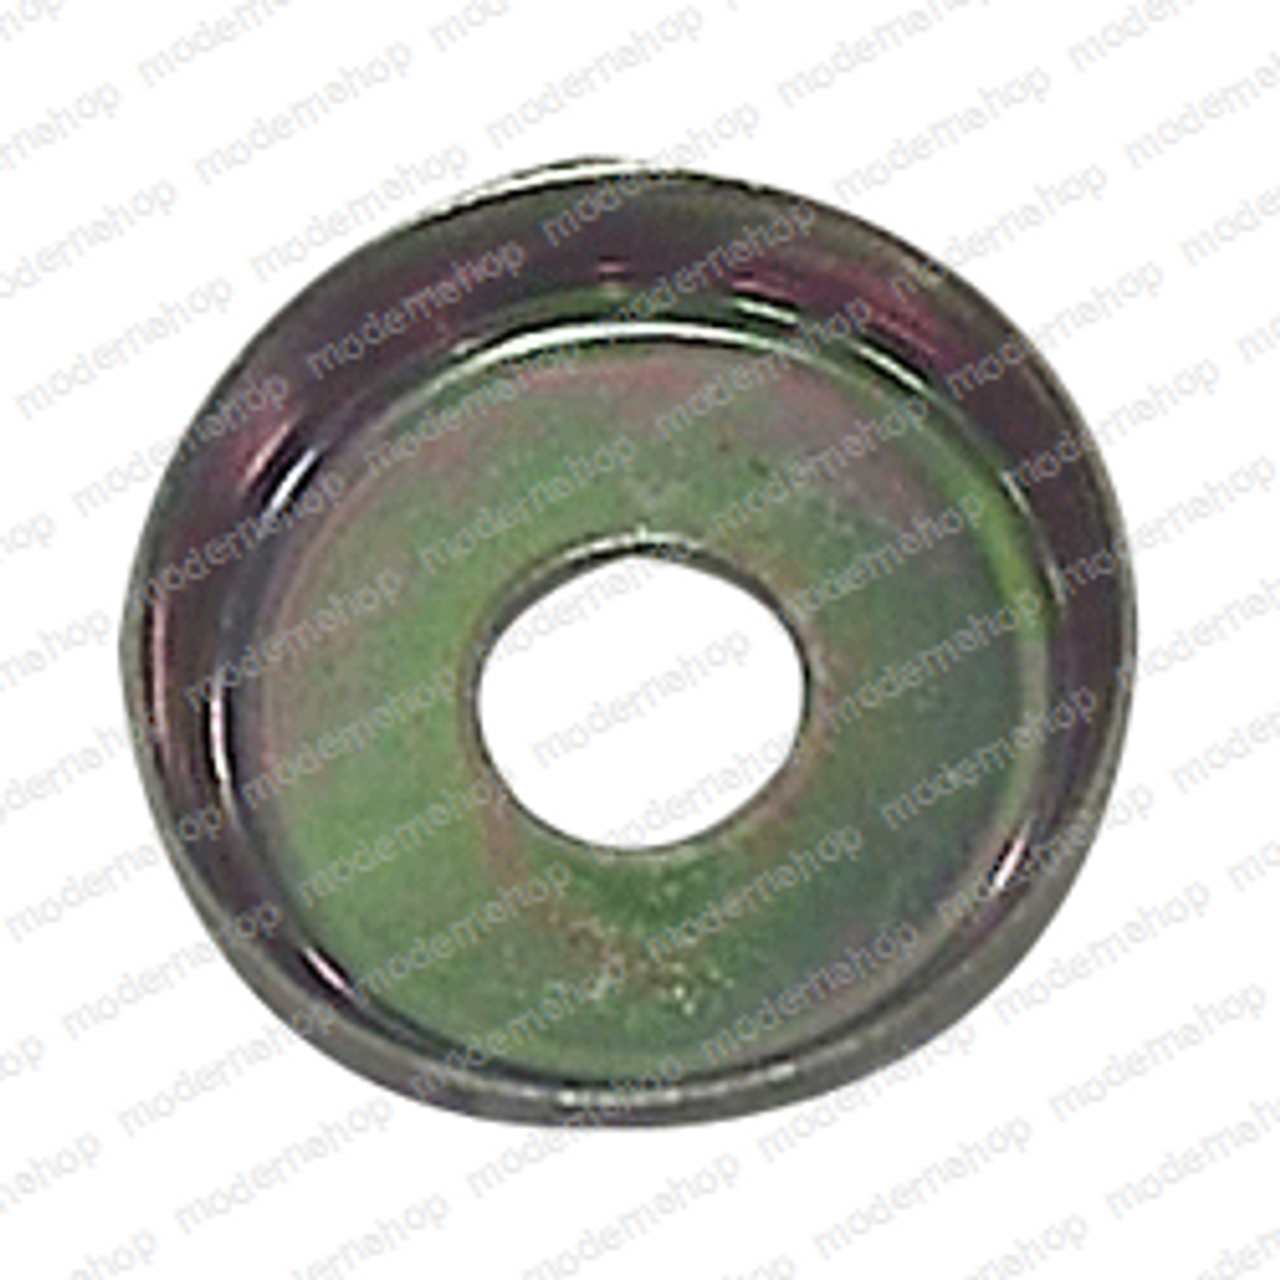 4740414: Gradall WASHER CUP .19 X .78 B633